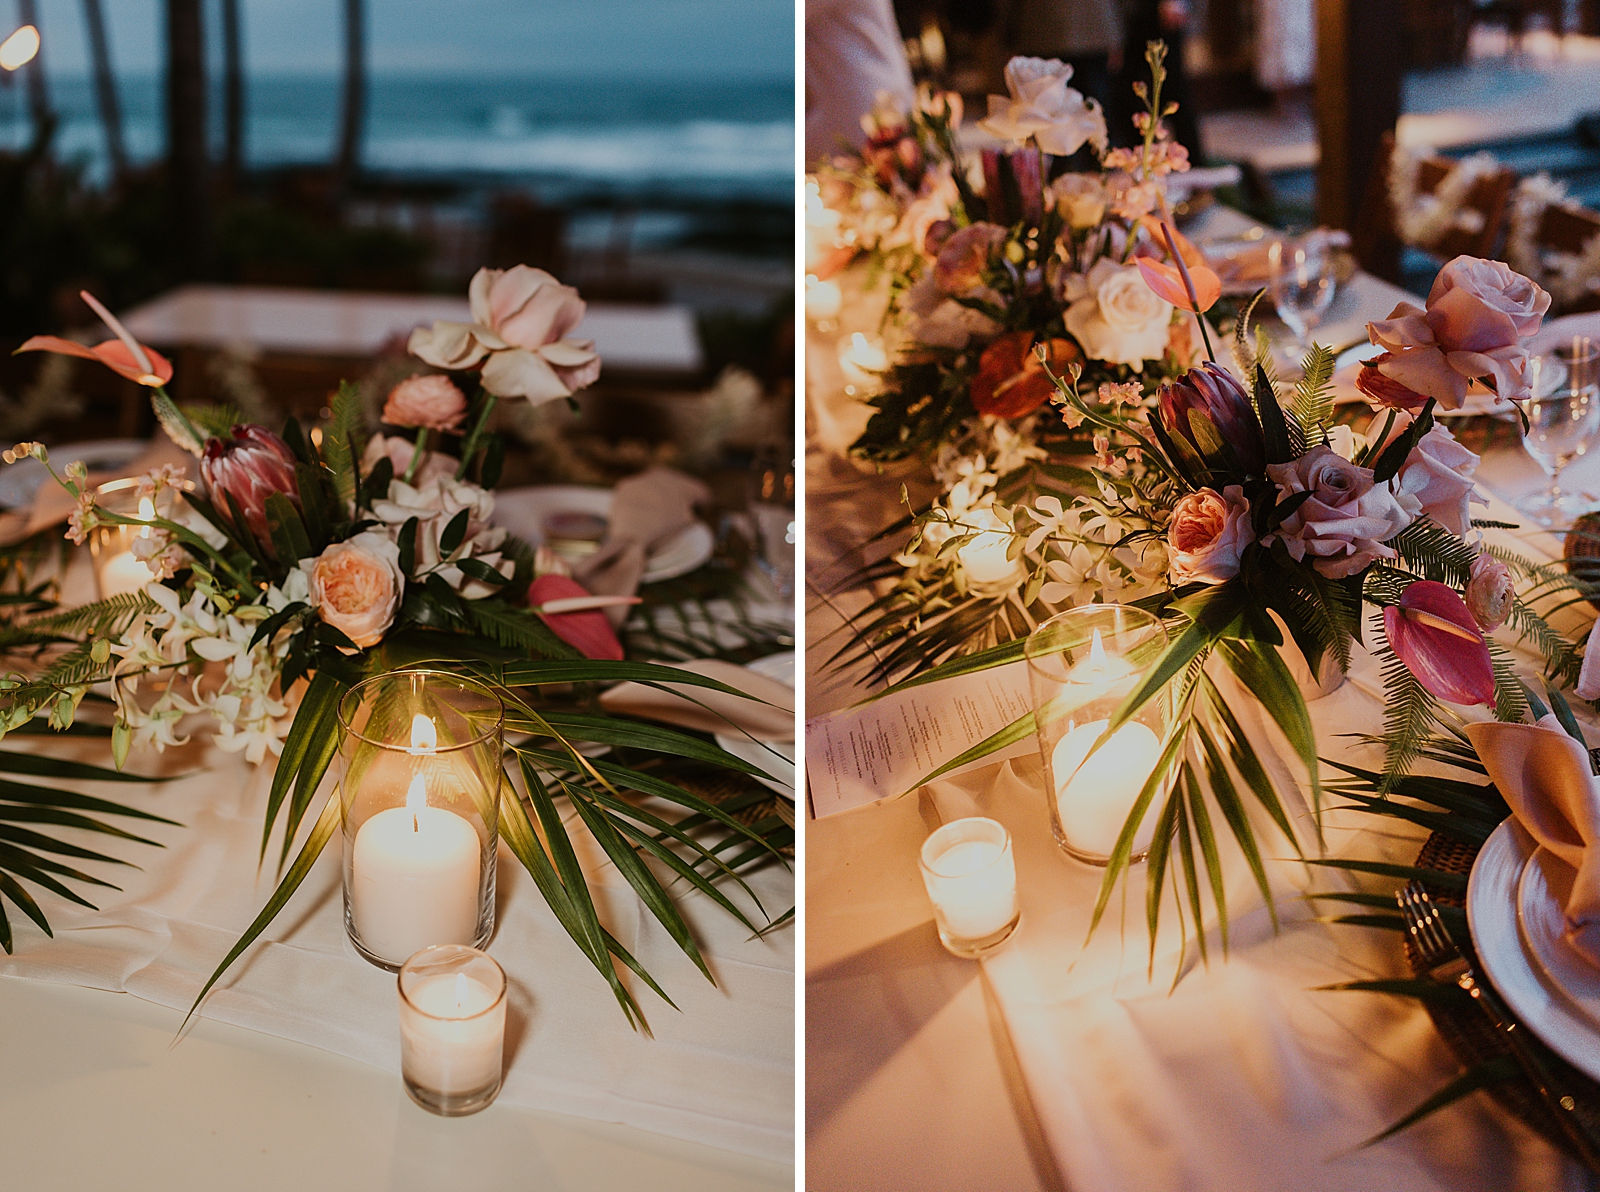 Detail shot of floral decor on the table with candles for nighttime Reception